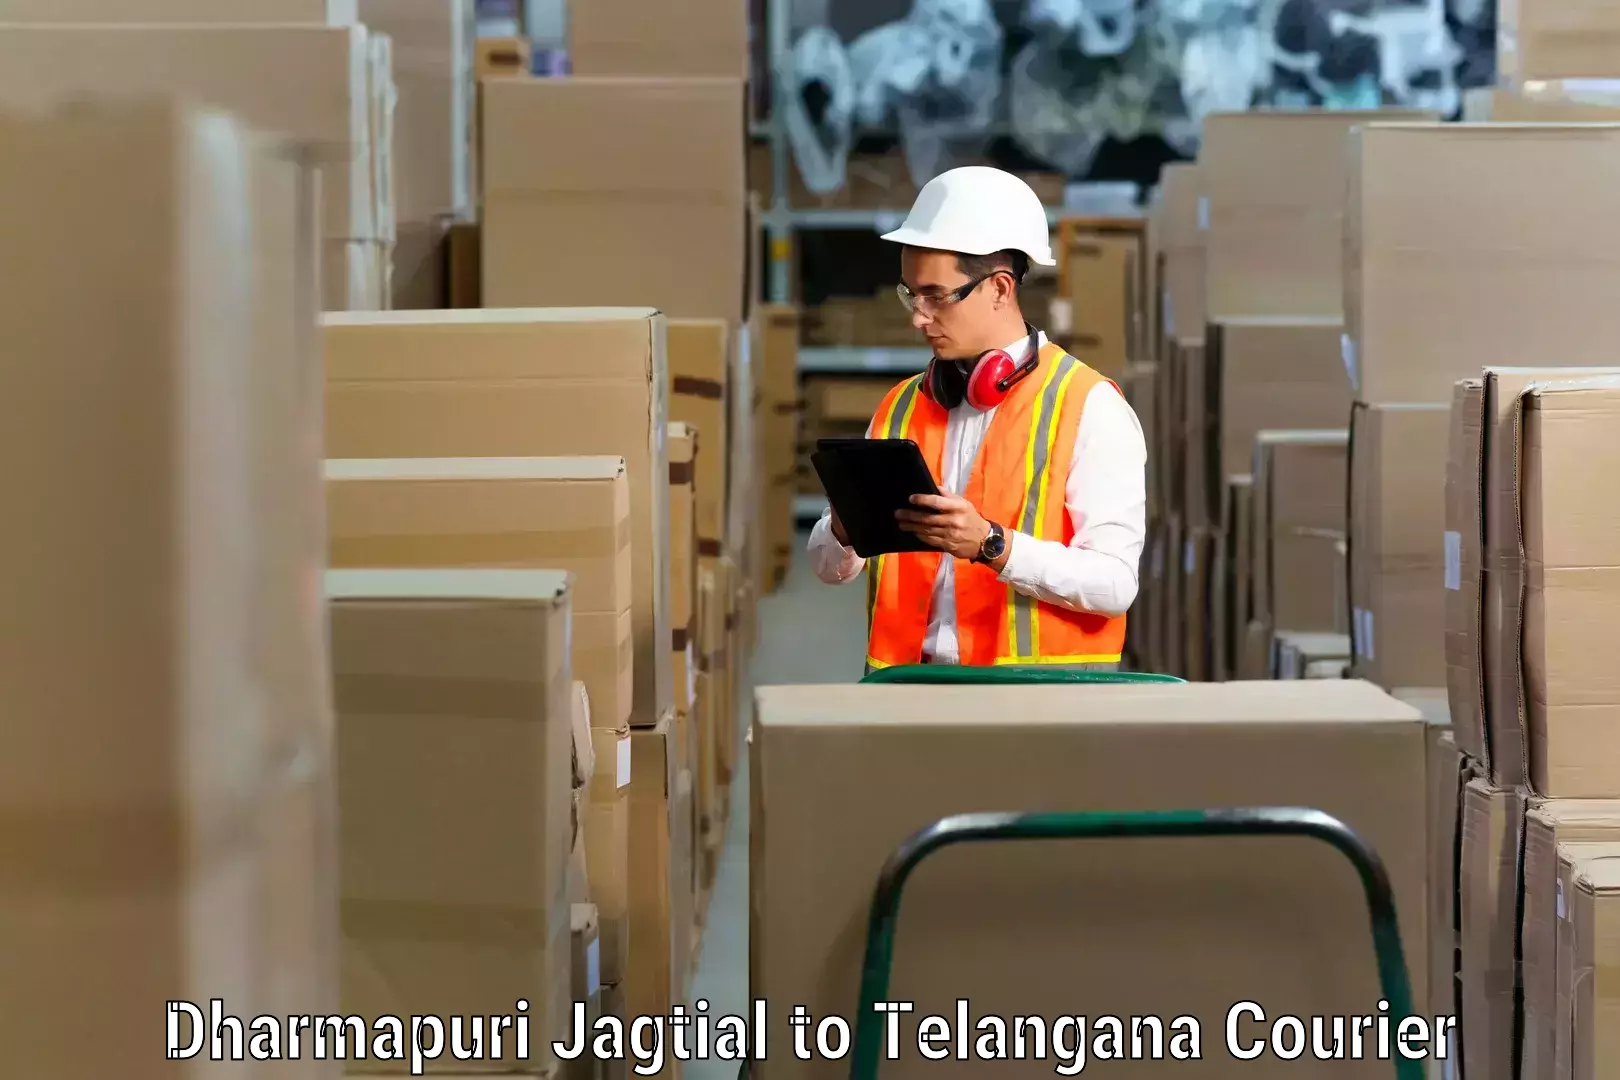 Professional relocation services Dharmapuri Jagtial to Sultanabad